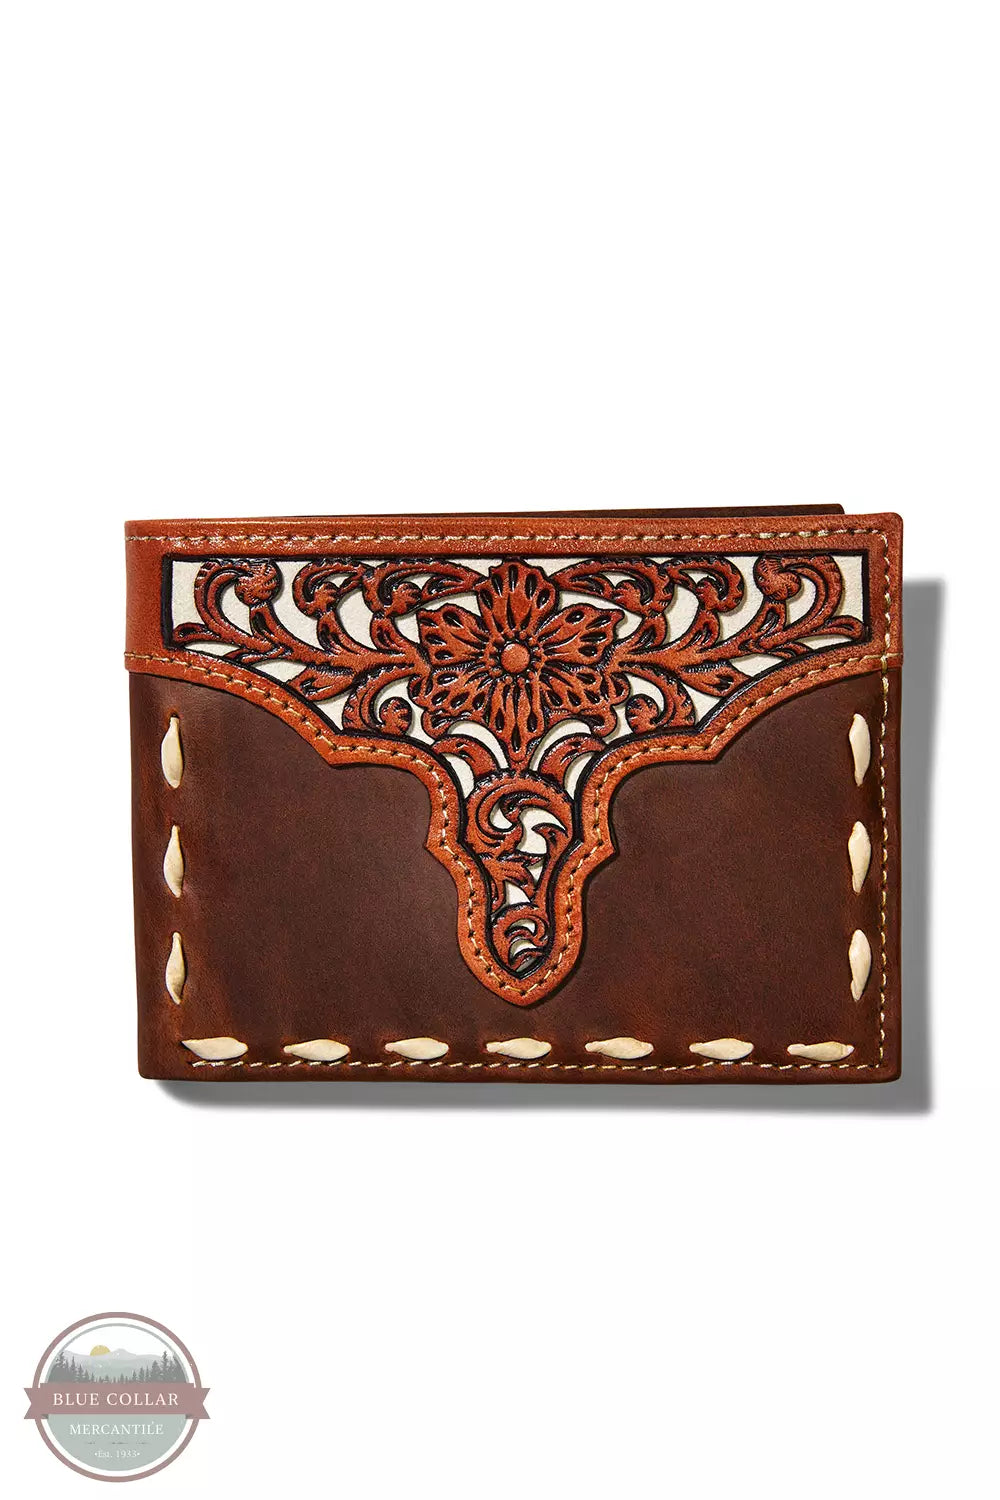 Ariat A3547344 Bi-Fold Floral Embroidery Run Stitch Wallet in Medium Brown with Removeable Passcase Front View